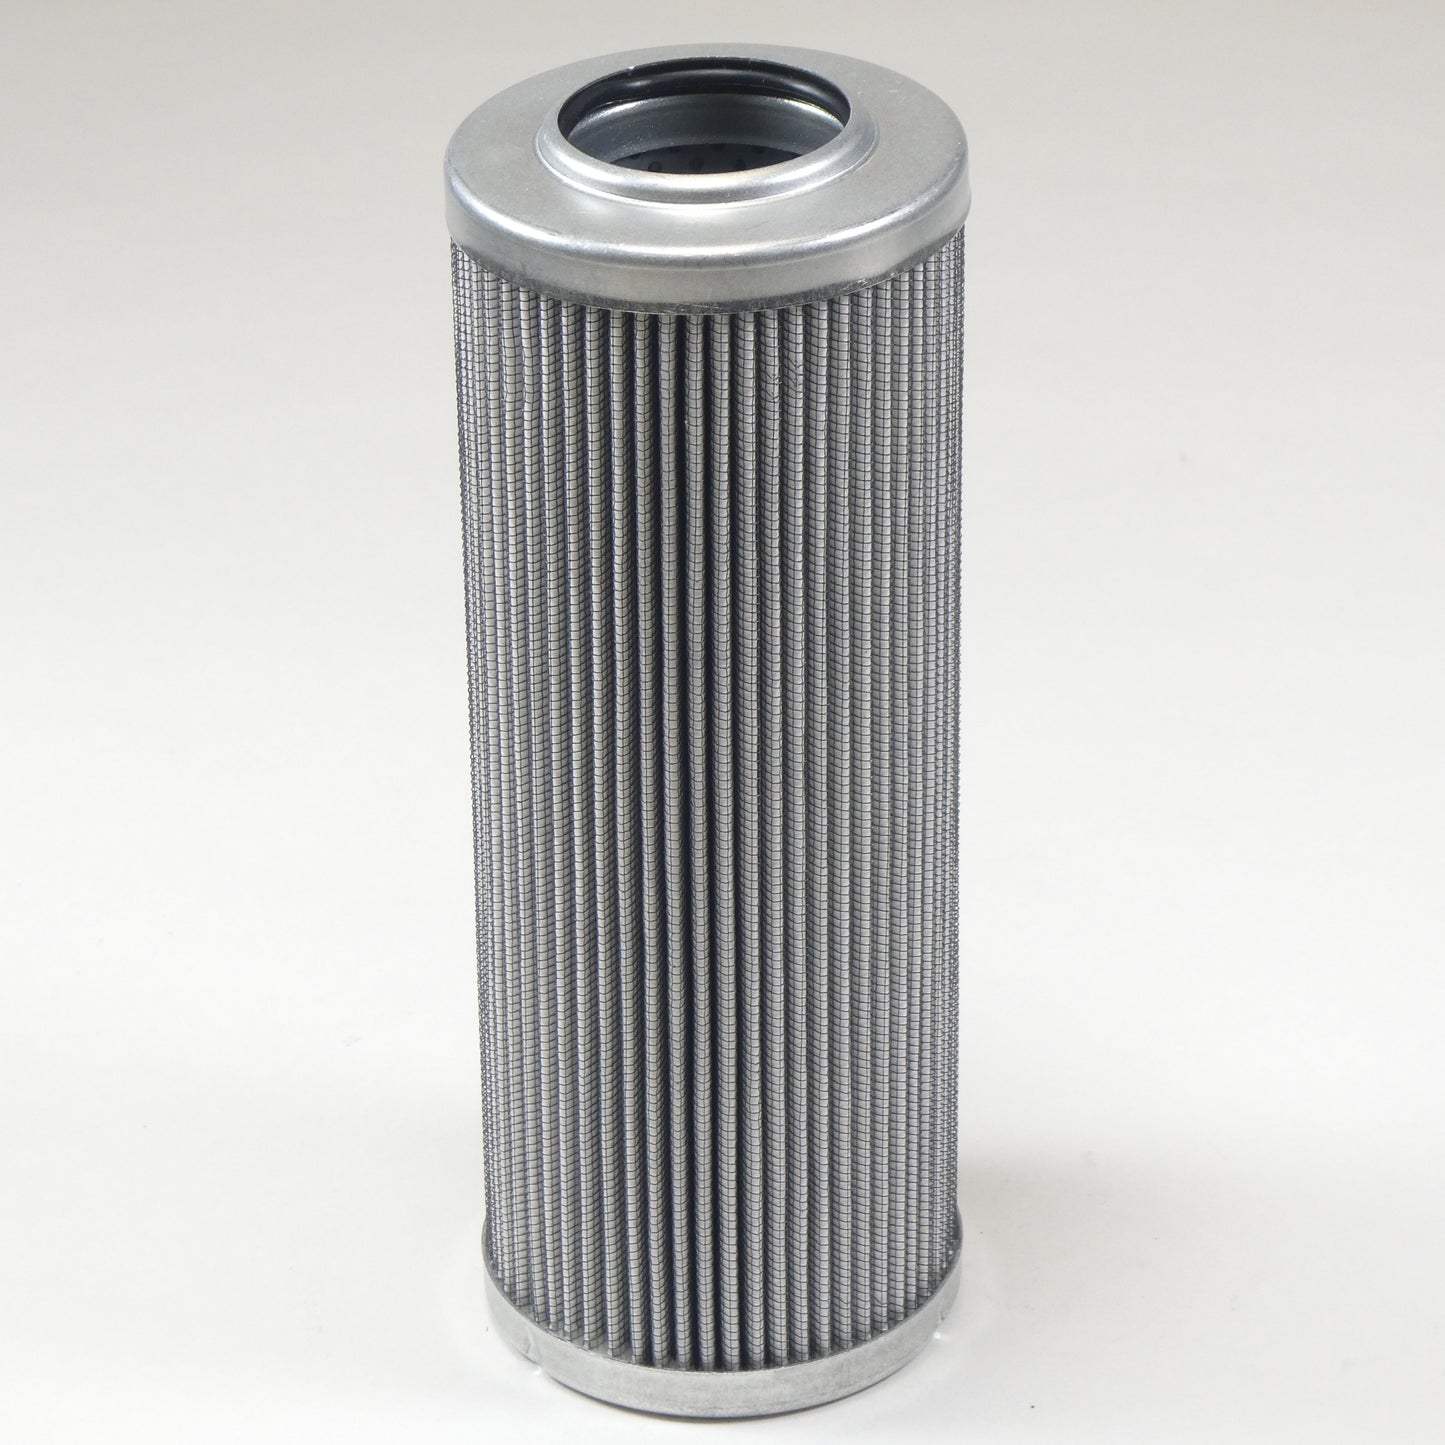 Hydrafil Replacement Filter Element for Hilco 3830-16-027-C